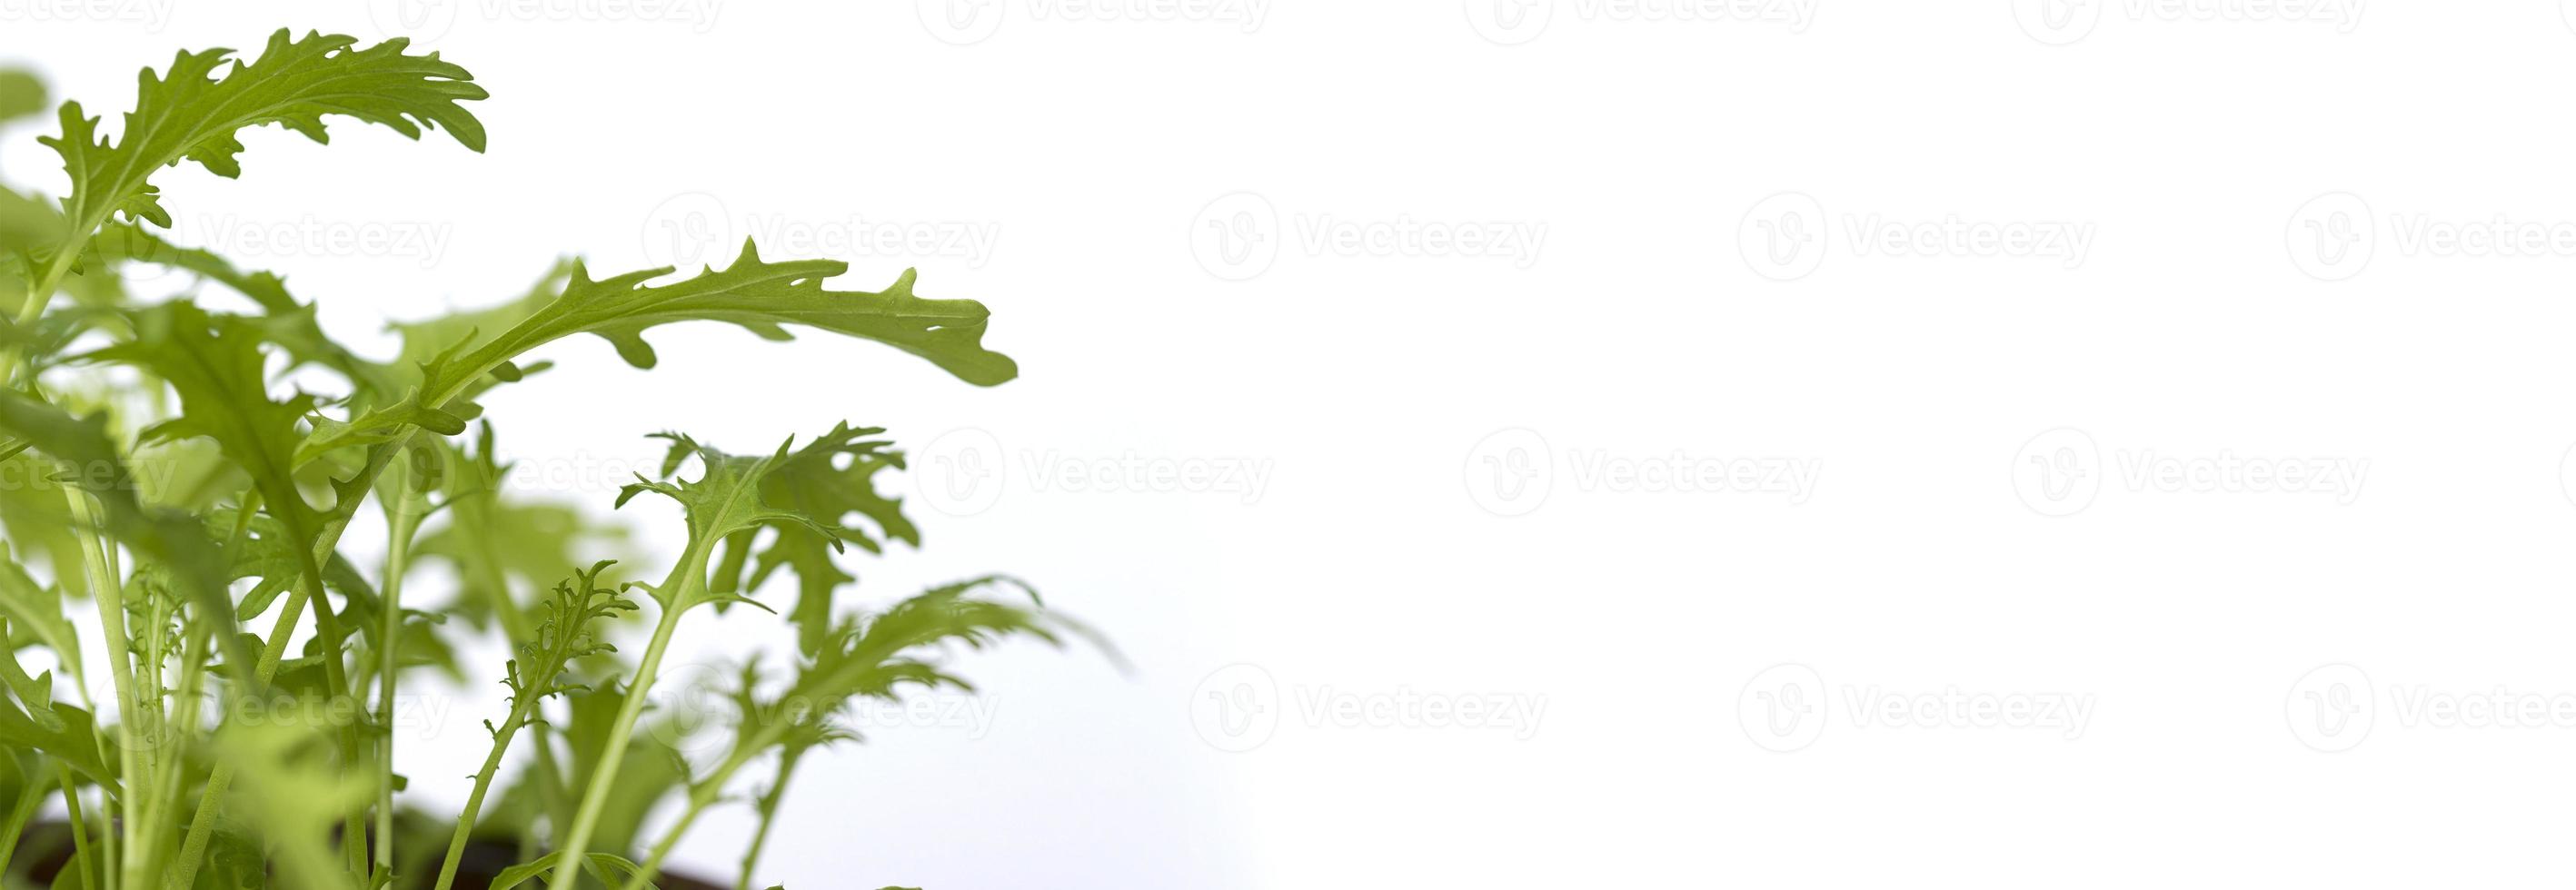 Isolated green grass on white background. photo